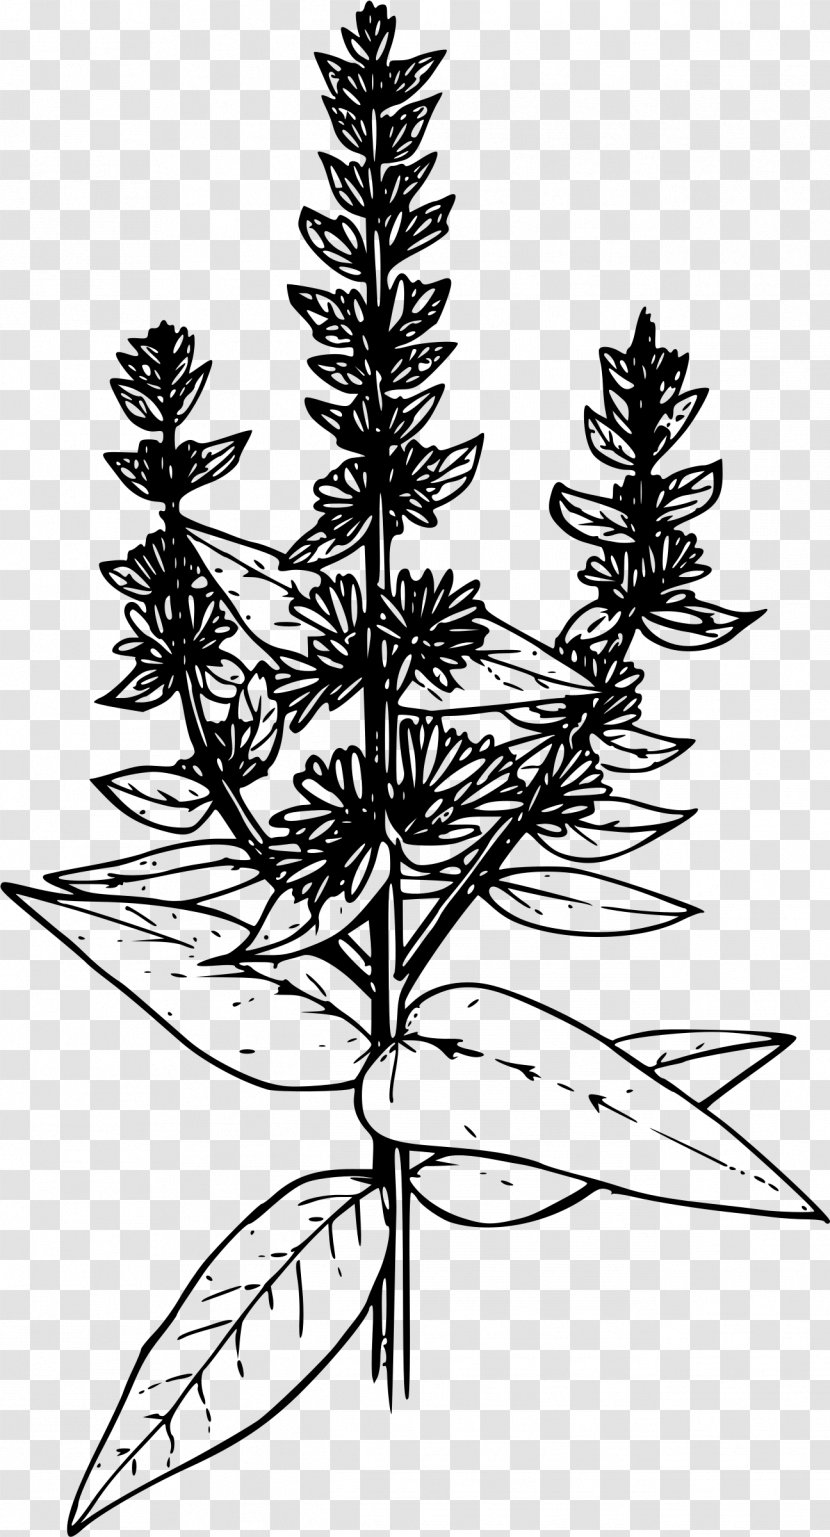 Coloring Book Drawing Purple Loosestrife - Pine Family - Purpleloosestrife Transparent PNG